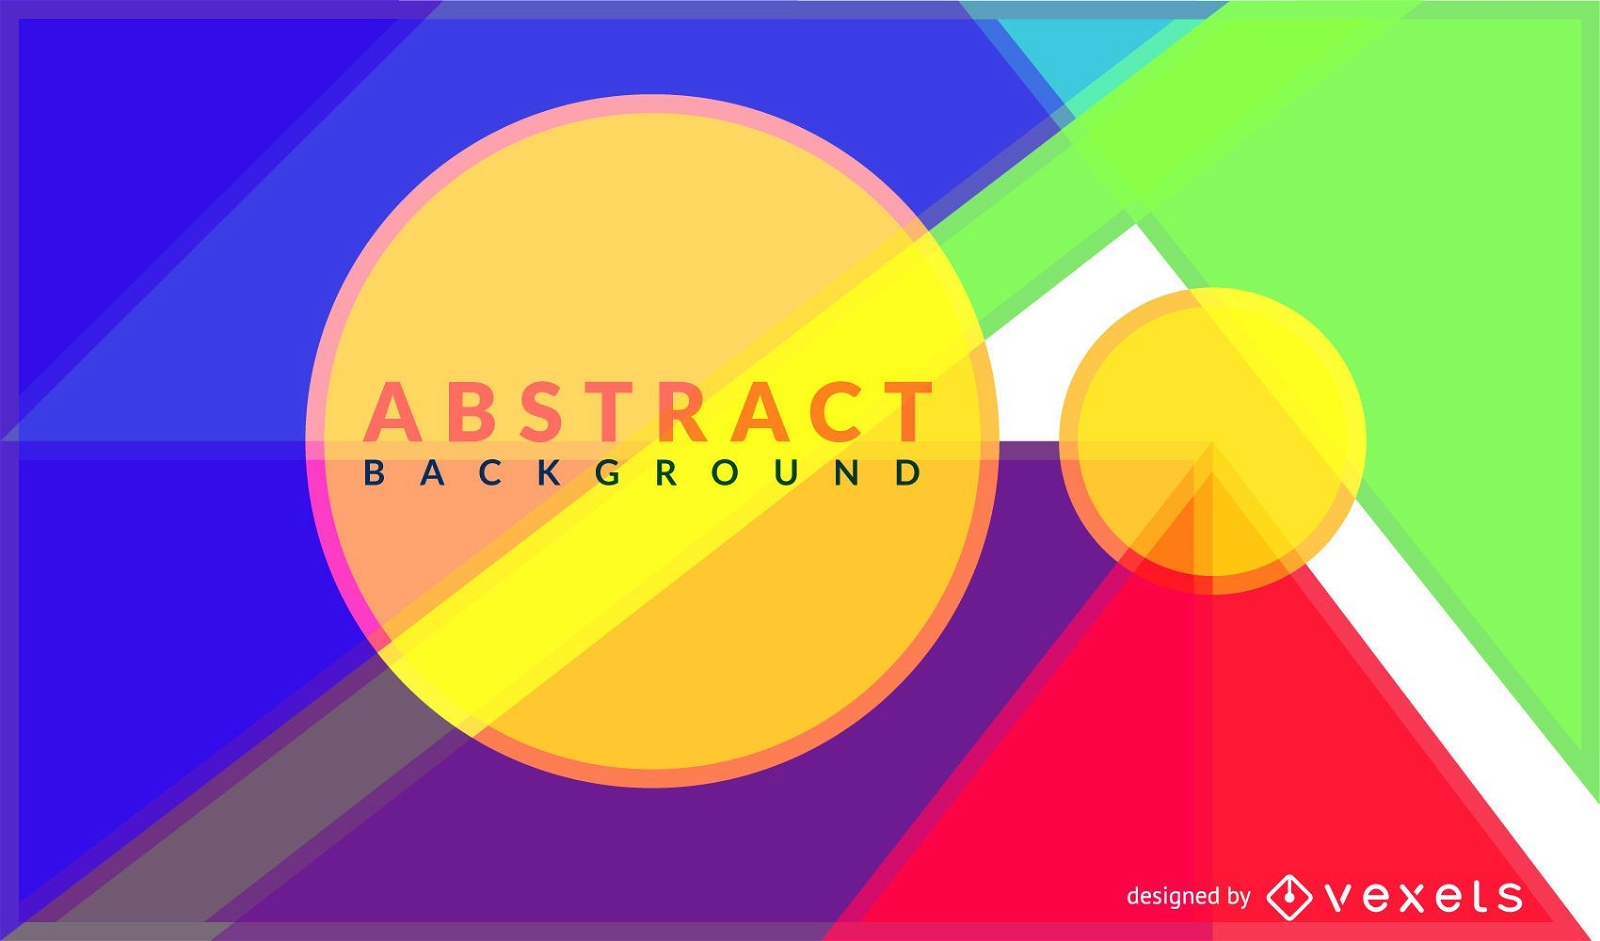 Colorful geometric shapes background design